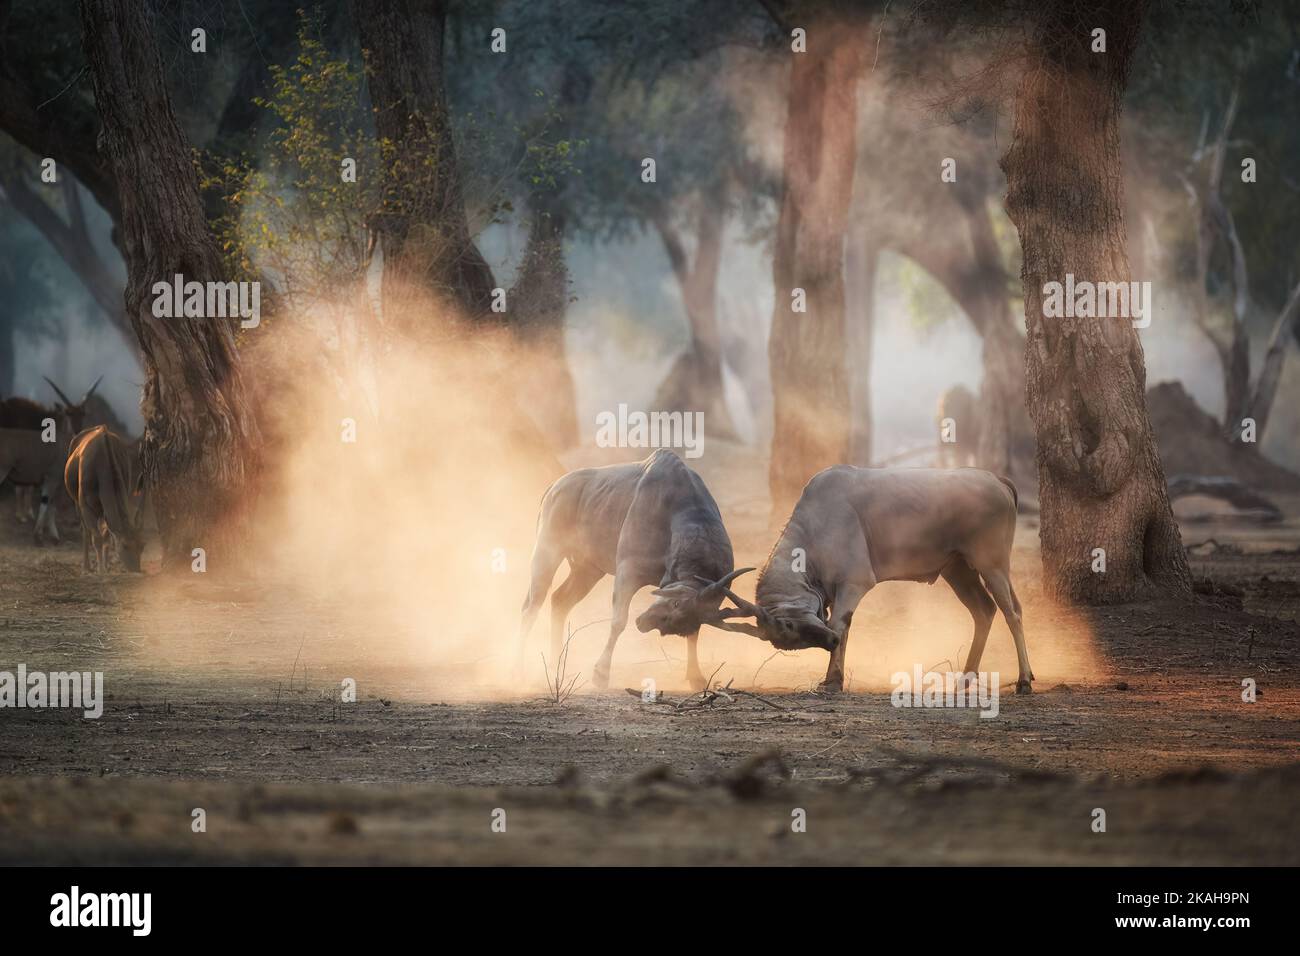 Two large male Eland antelopes, Taurotragus oryx, fighting in an orange  cloud of dust backlighted by rays of morning sun. Mana Pools, Zimbabwe. Stock Photo